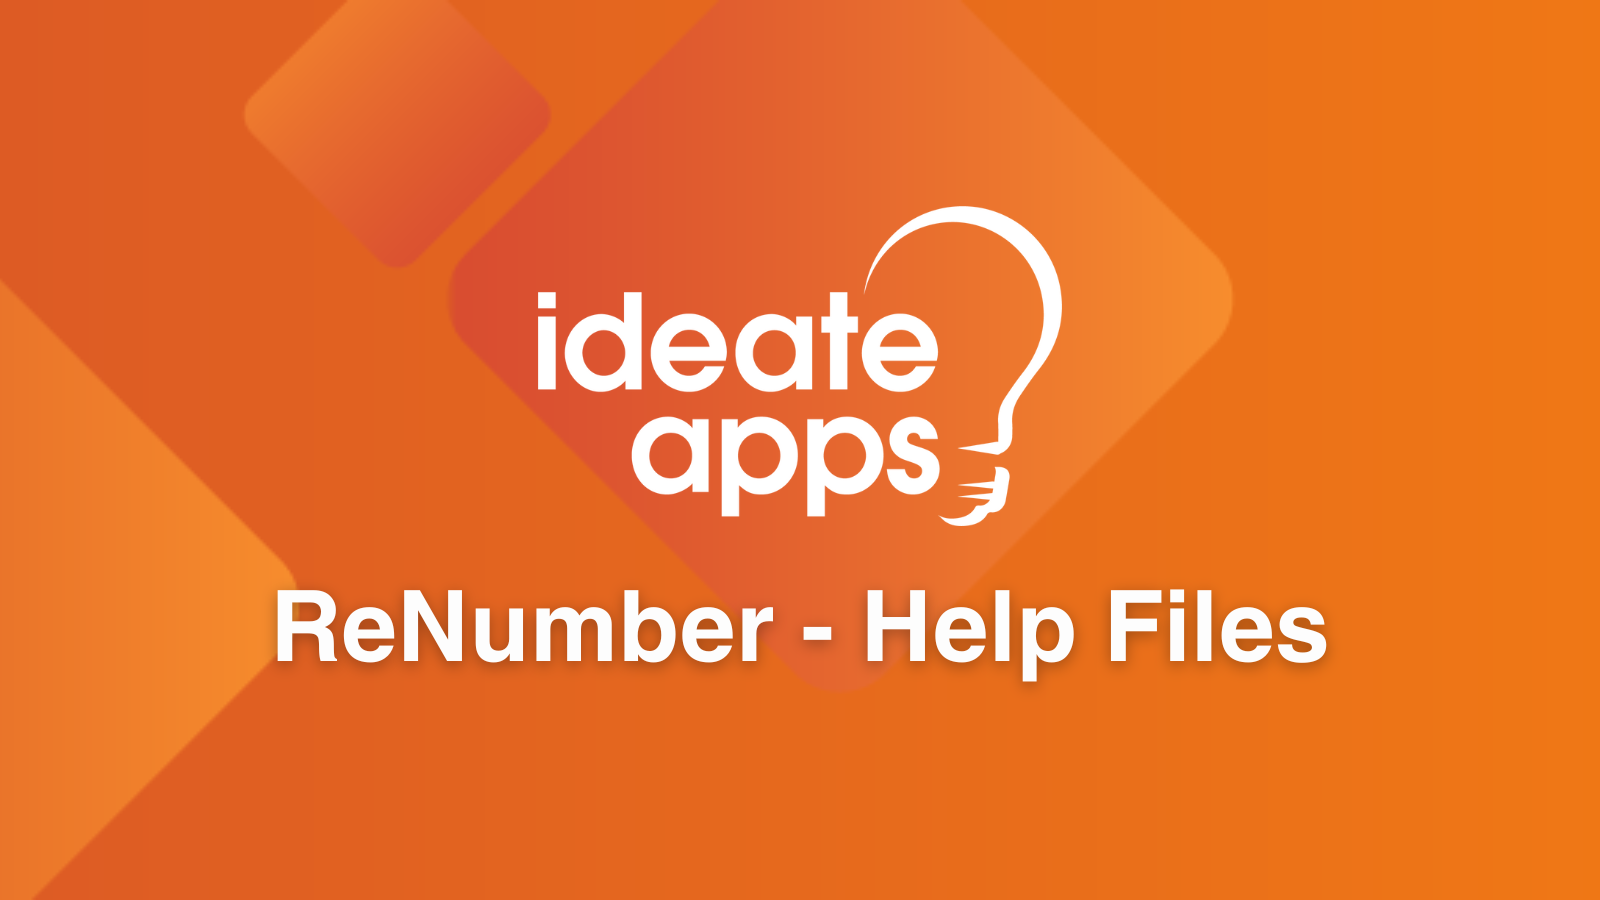 Search IdeateApps ReNumber Help Files